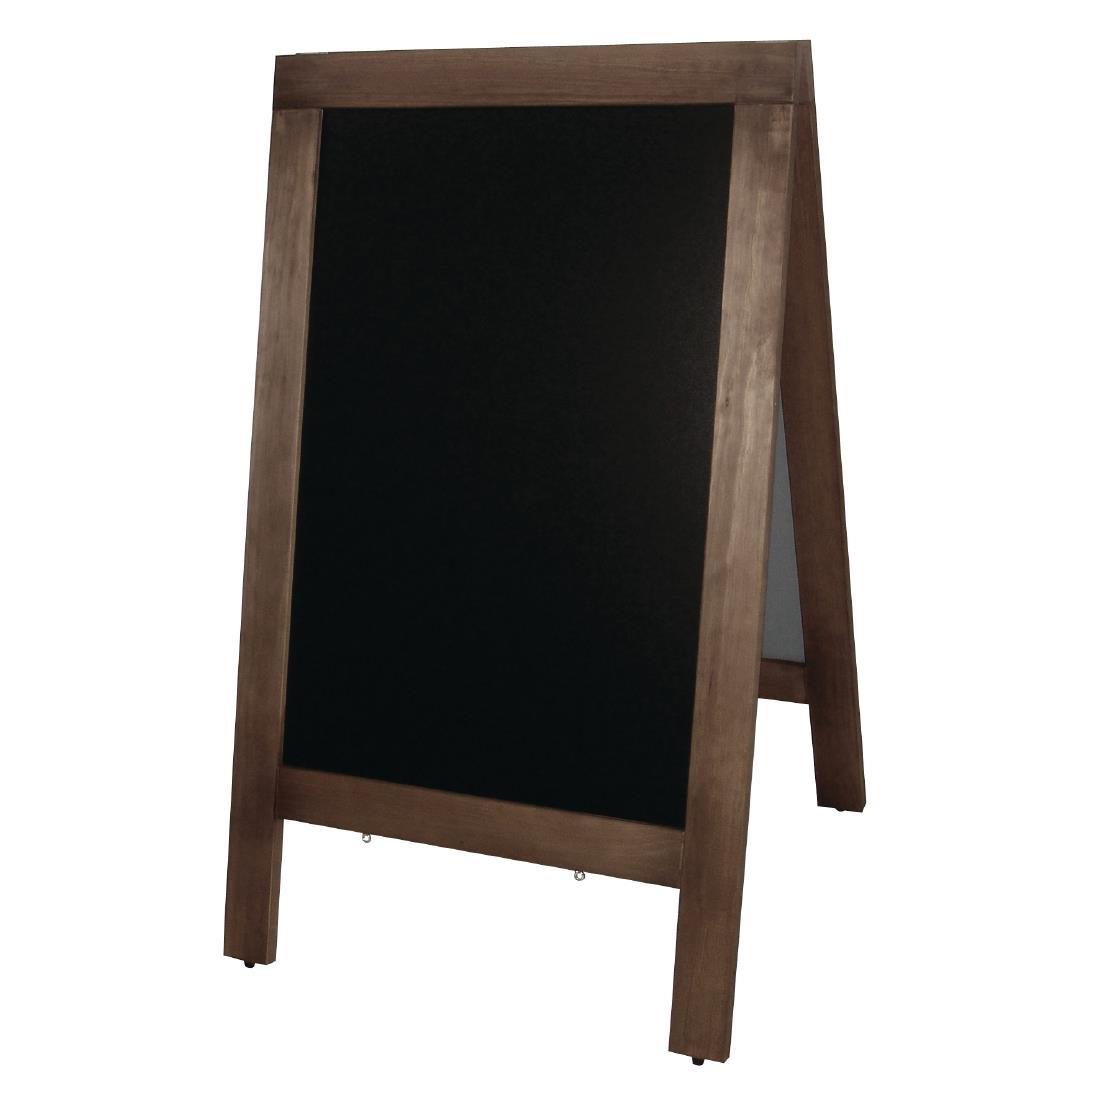 Olympia Pavement Board 1200 x 700mm Wood Framed - GG109  - 1